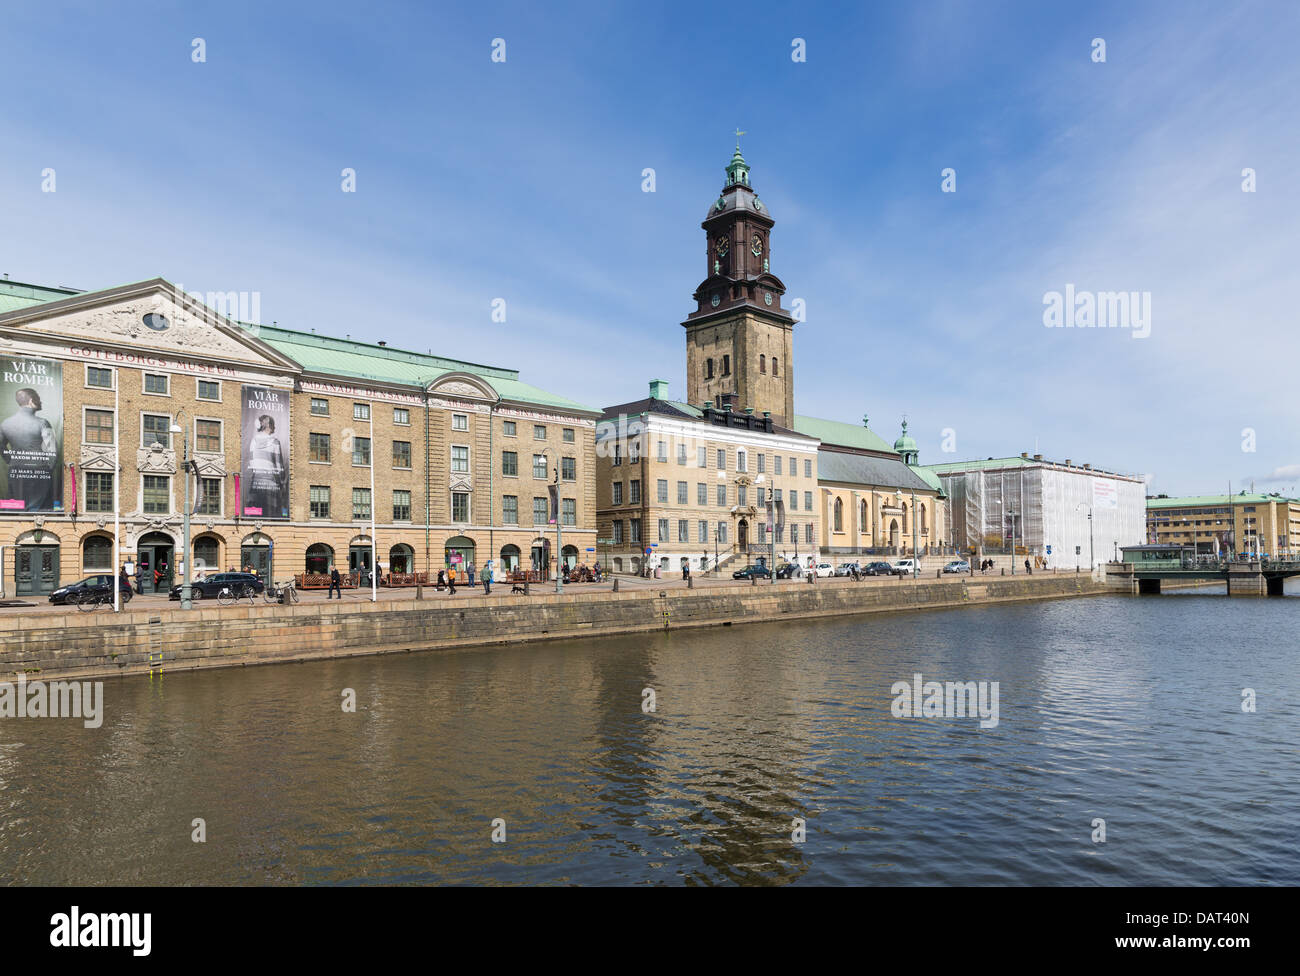 Goteborg - APRIL 26: View of the Big Harbor Canal with City Museum and Christina Church on April 26, 2013 in Goteborg, Sweden Stock Photo